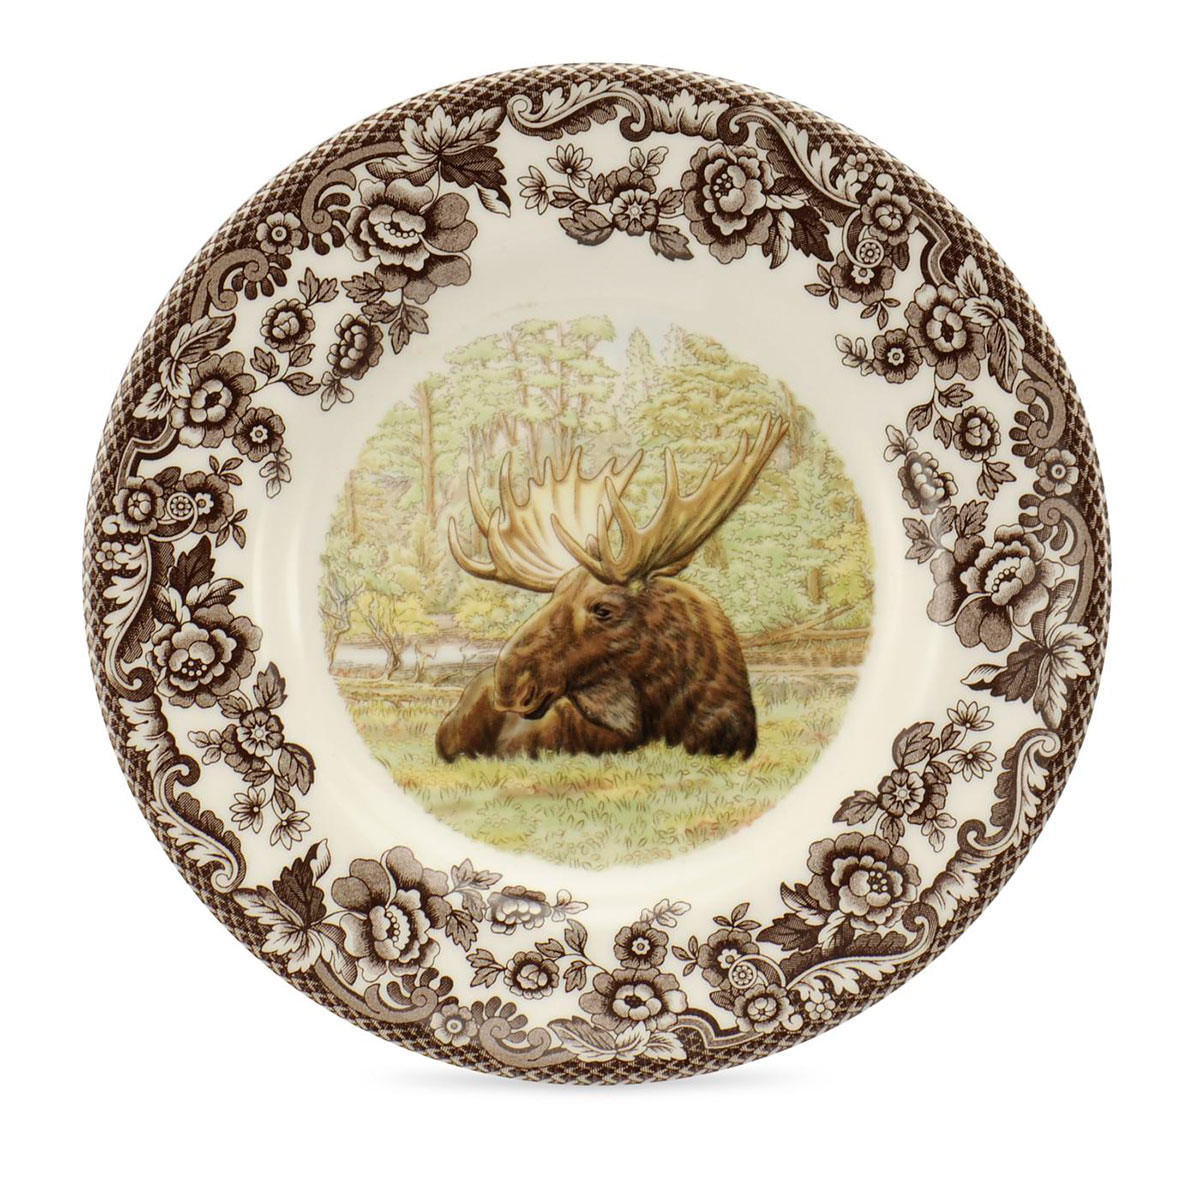 Spode Woodland Majestic Moose China Bread and Butter Plate, Magestic Moose